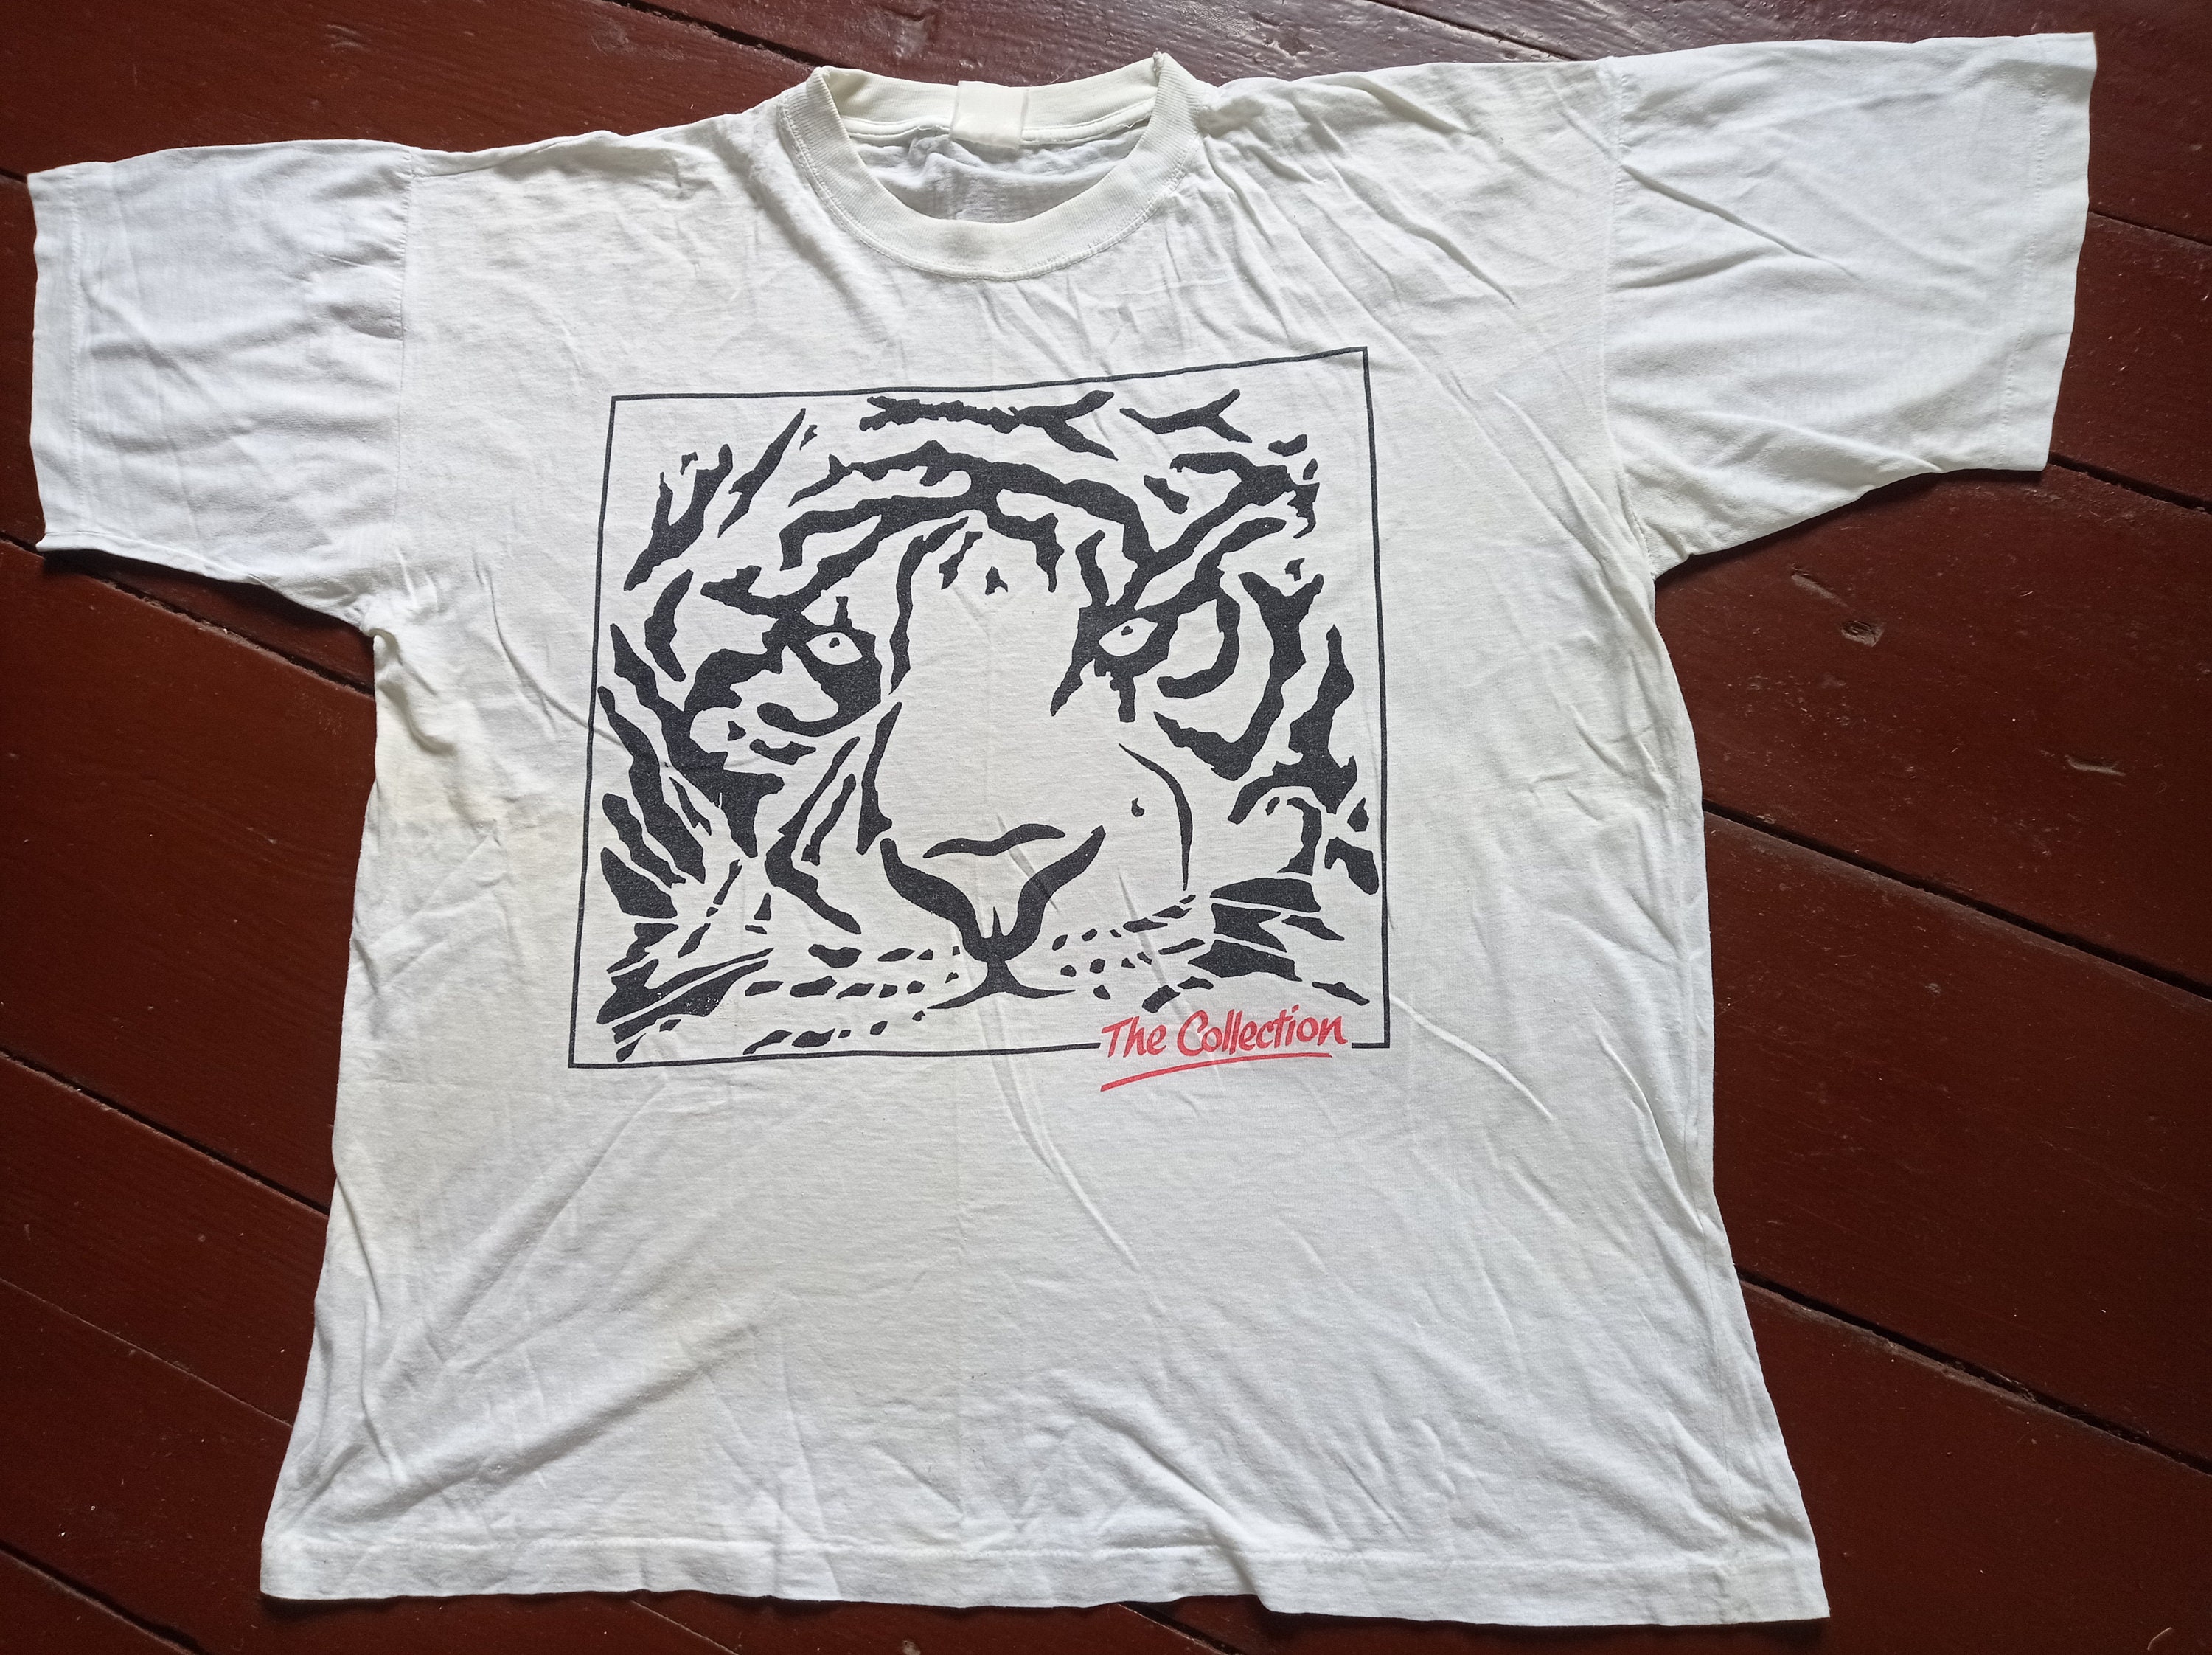 VTG Esso Tiger T Shirt the Collection Single Stitch Etsy